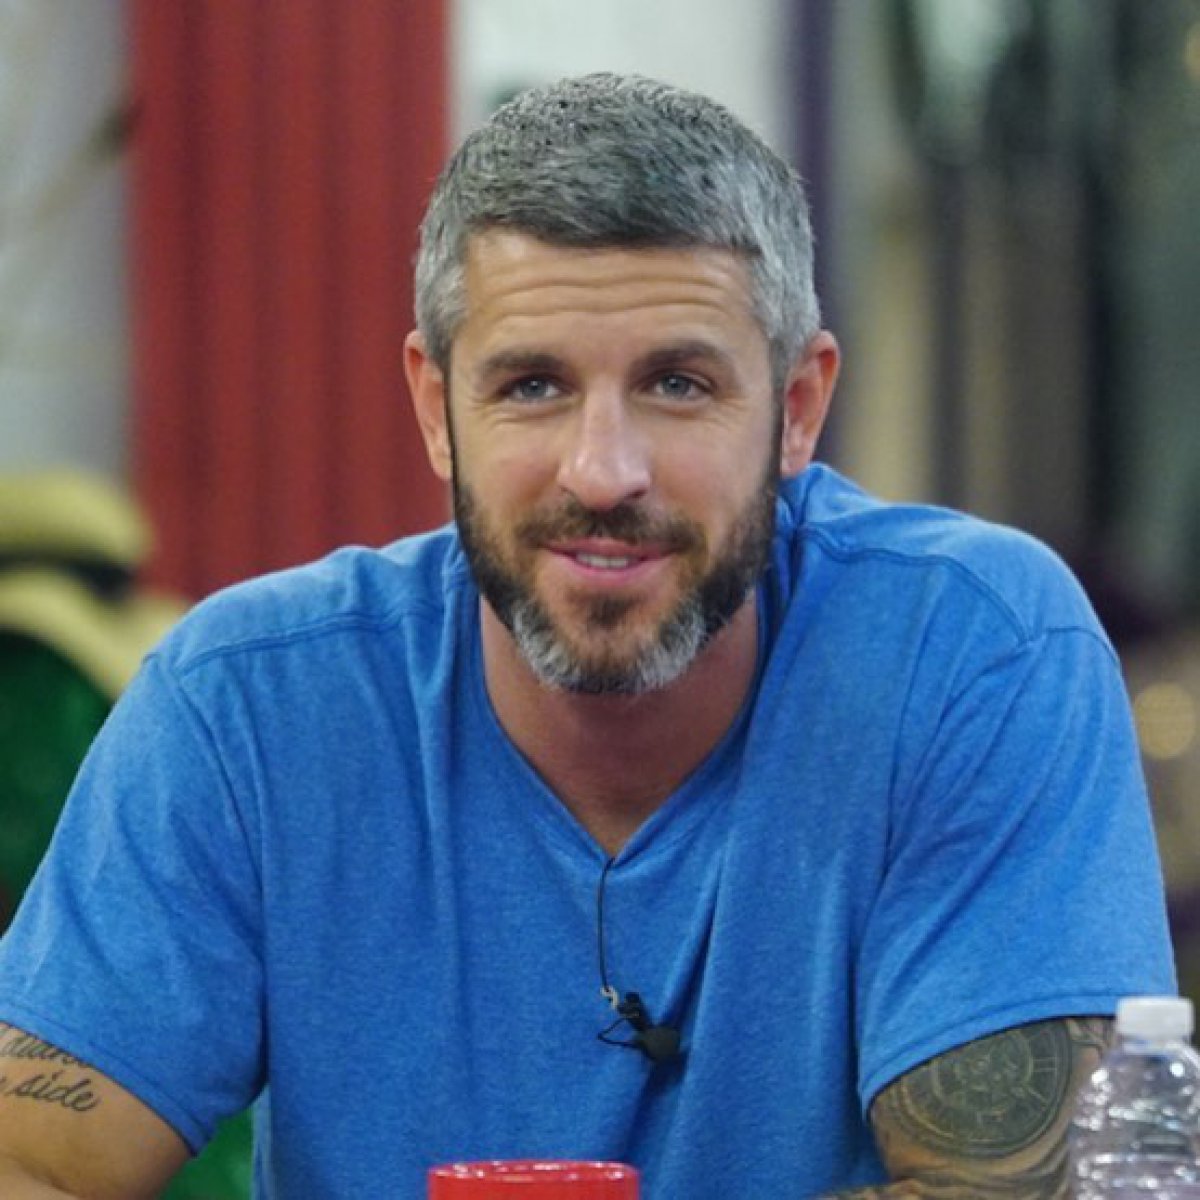 Matt Clines 11 things to know about the 'Big Brother' houseguest